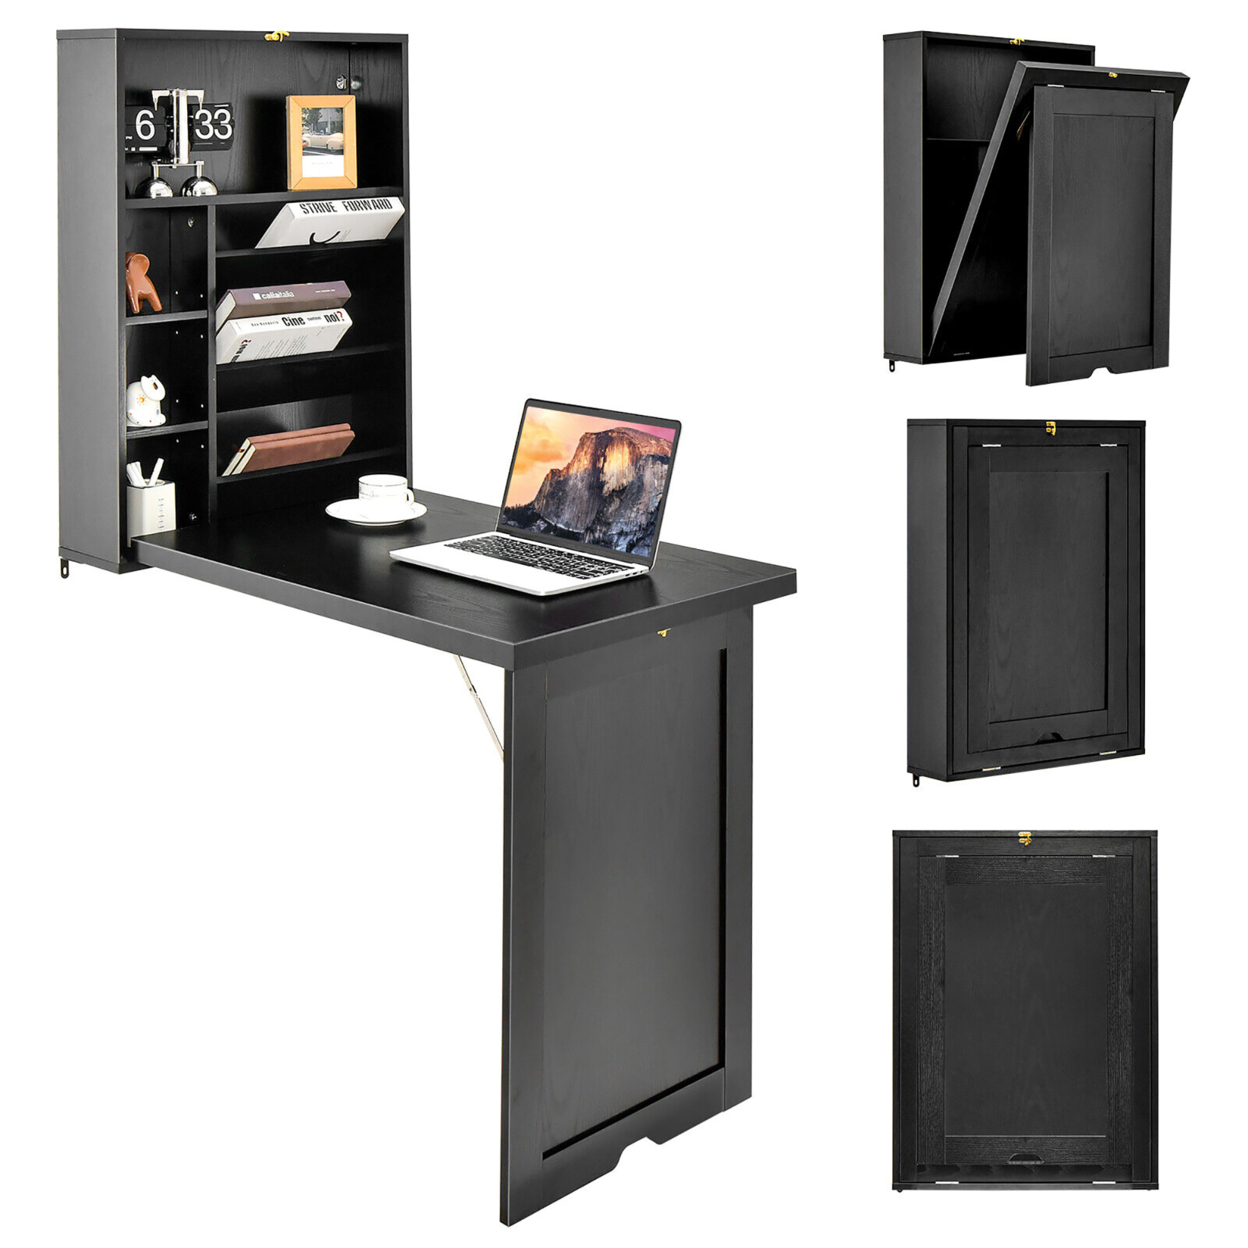 Wall Mounted Fold-Out Convertible Floating Desk Space Saver Writing Table Black